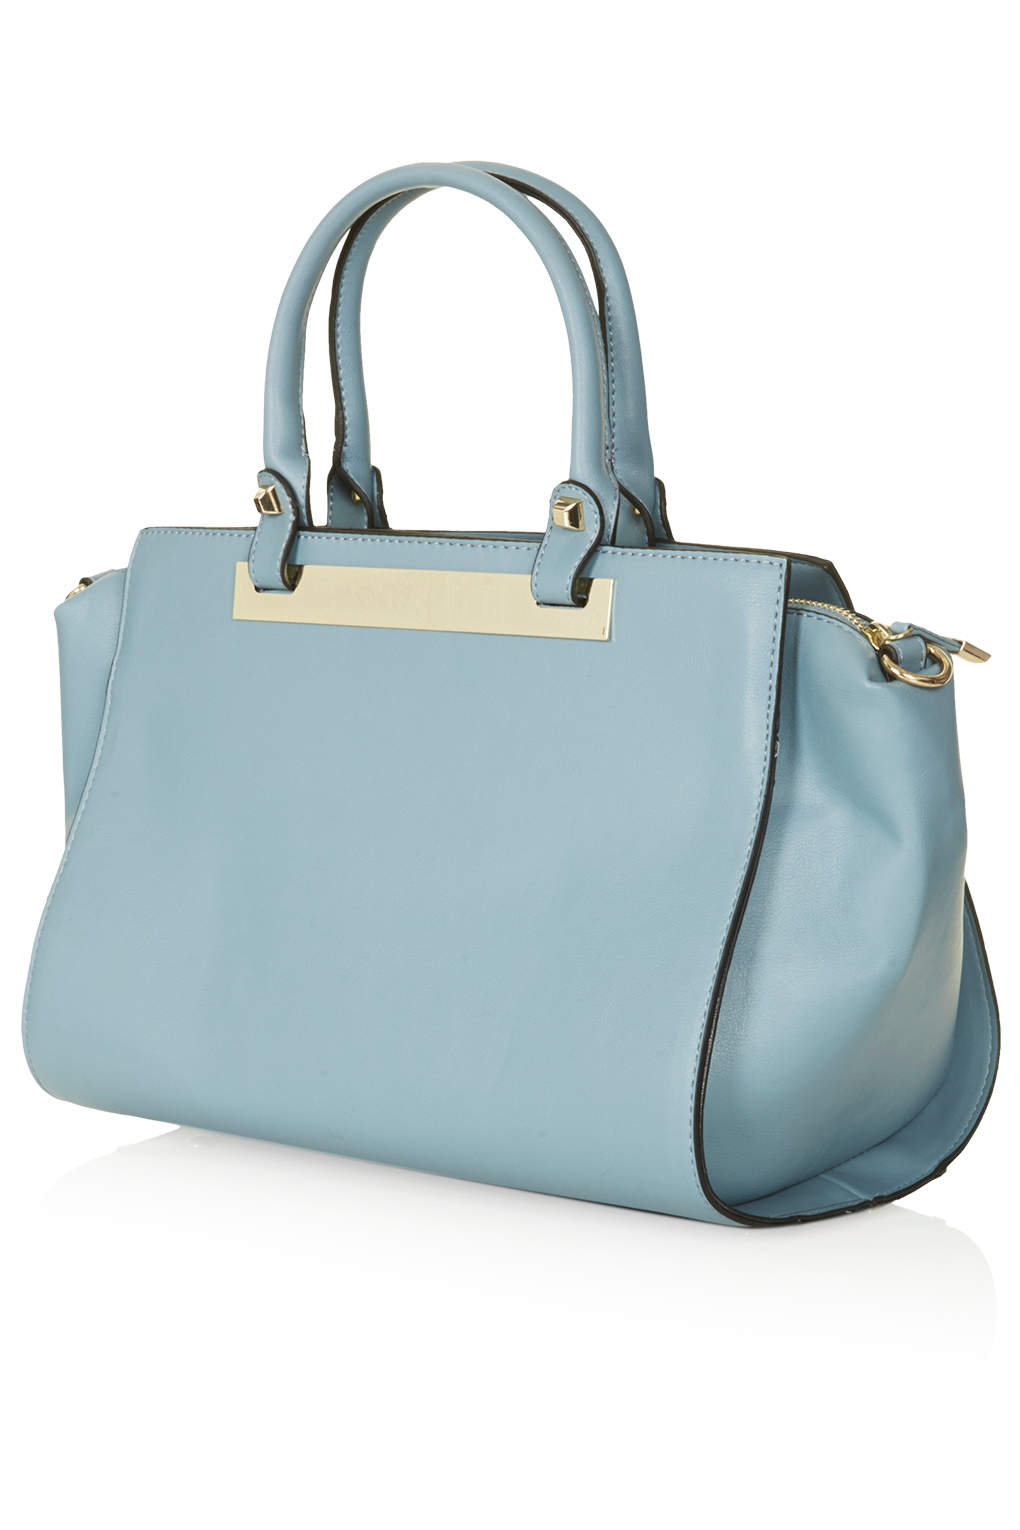 Lyst - Topshop Plated Holdall Bag in Blue